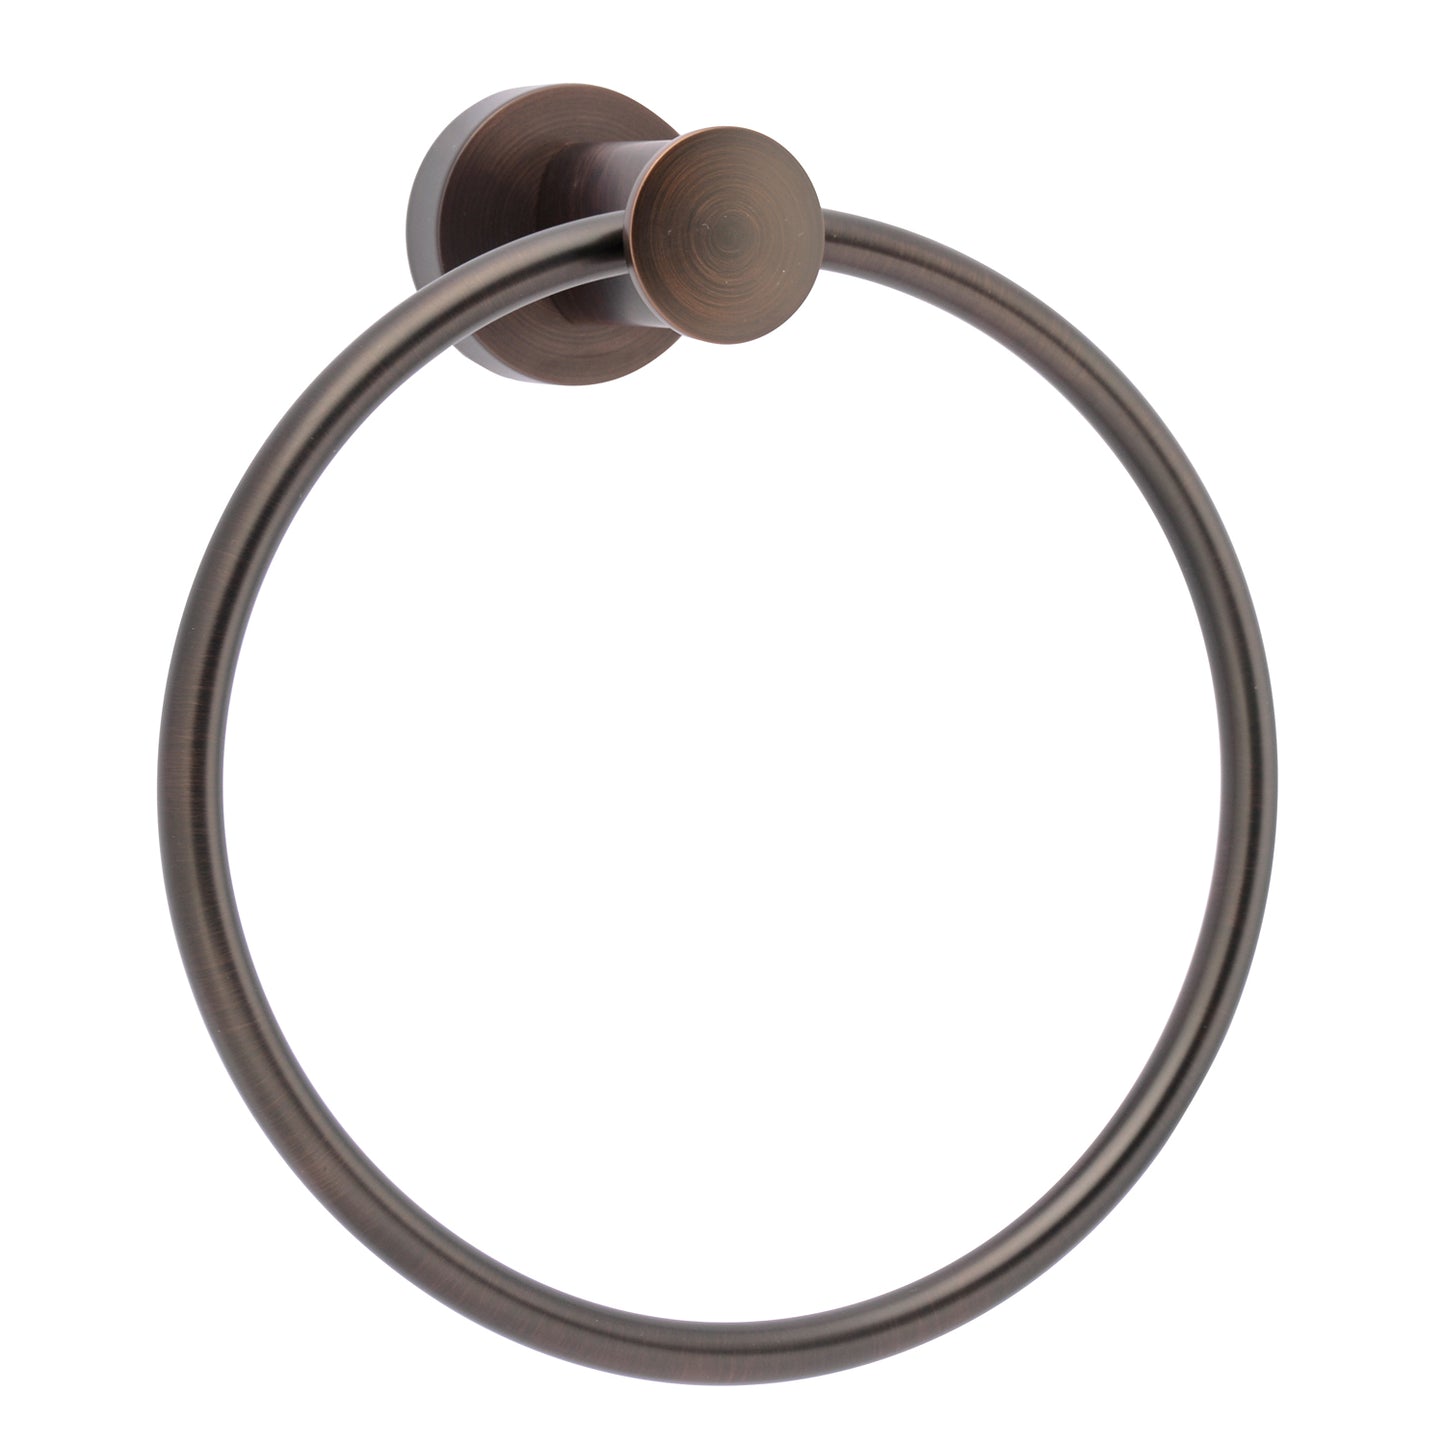 Plumer Towel Ring in Oil Rubbed Bronze